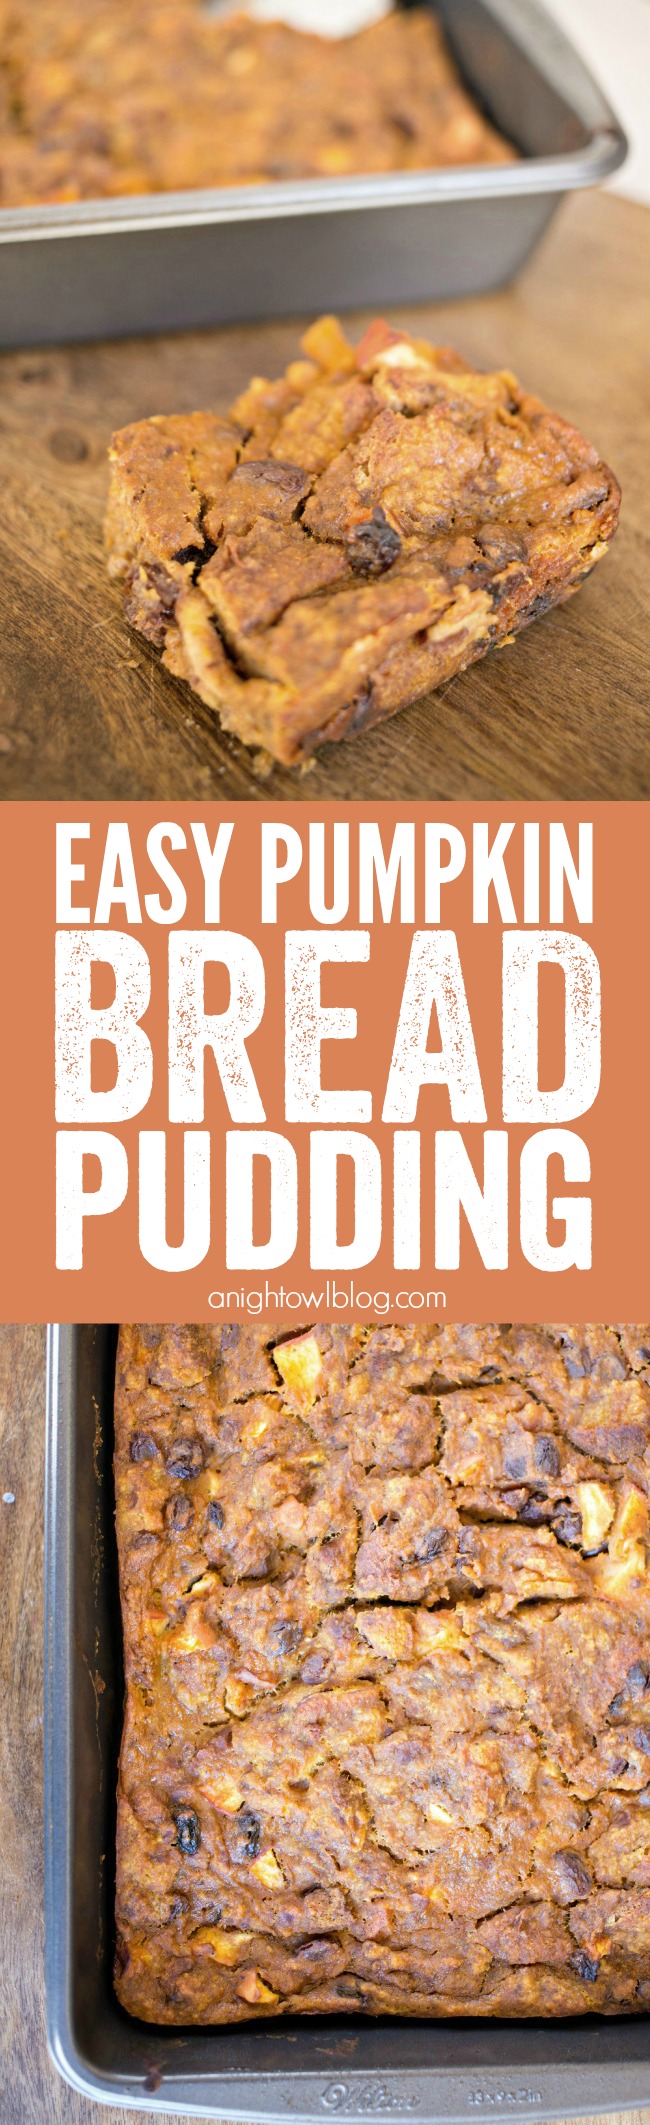 This Easy Pumpkin Bread Pudding is the perfect make-ahead fall breakfast!